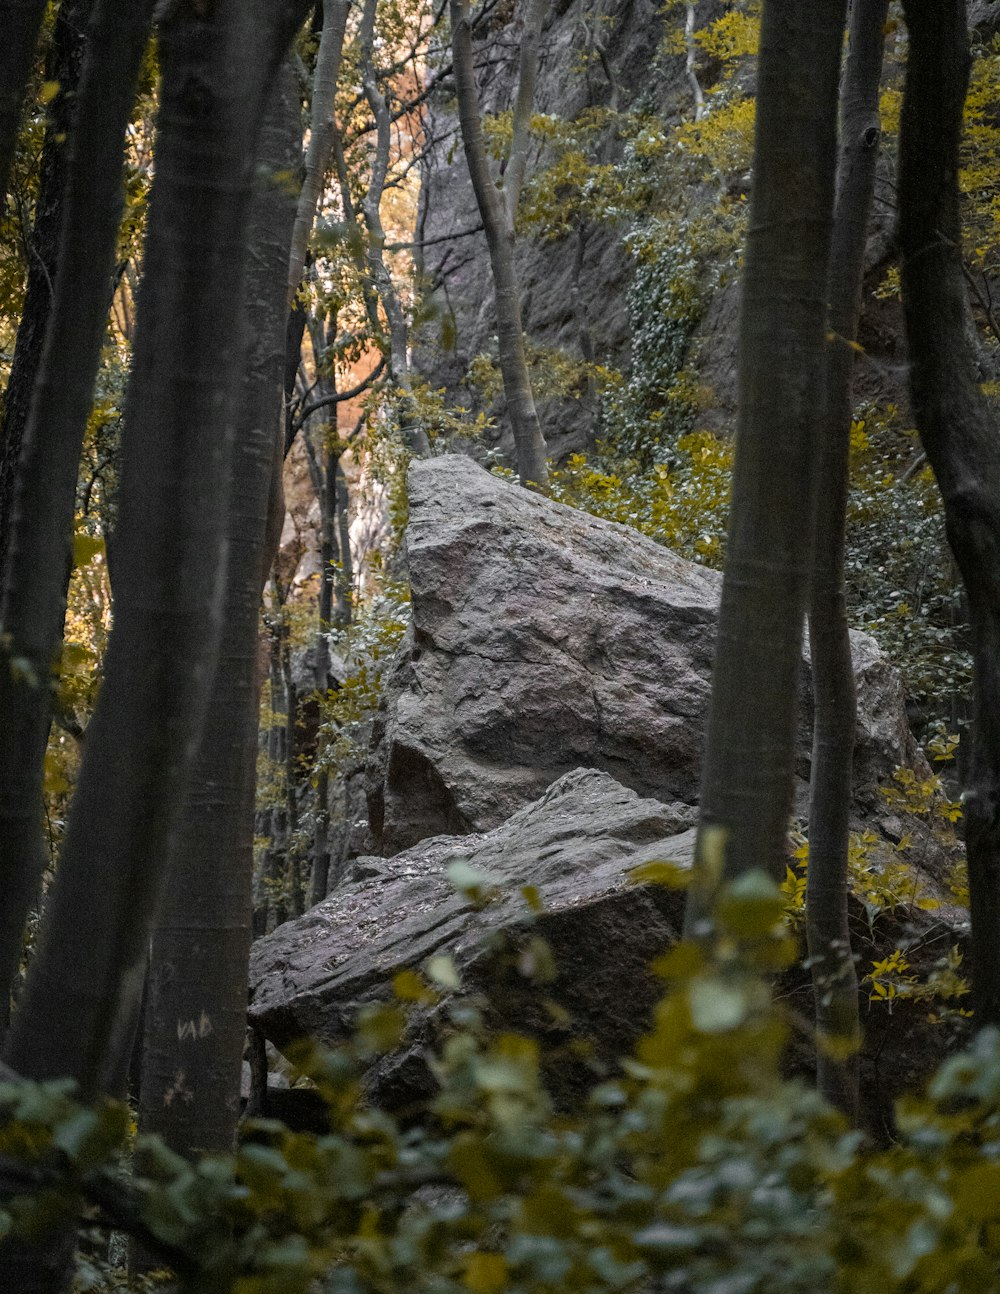 a large rock in the middle of a forest